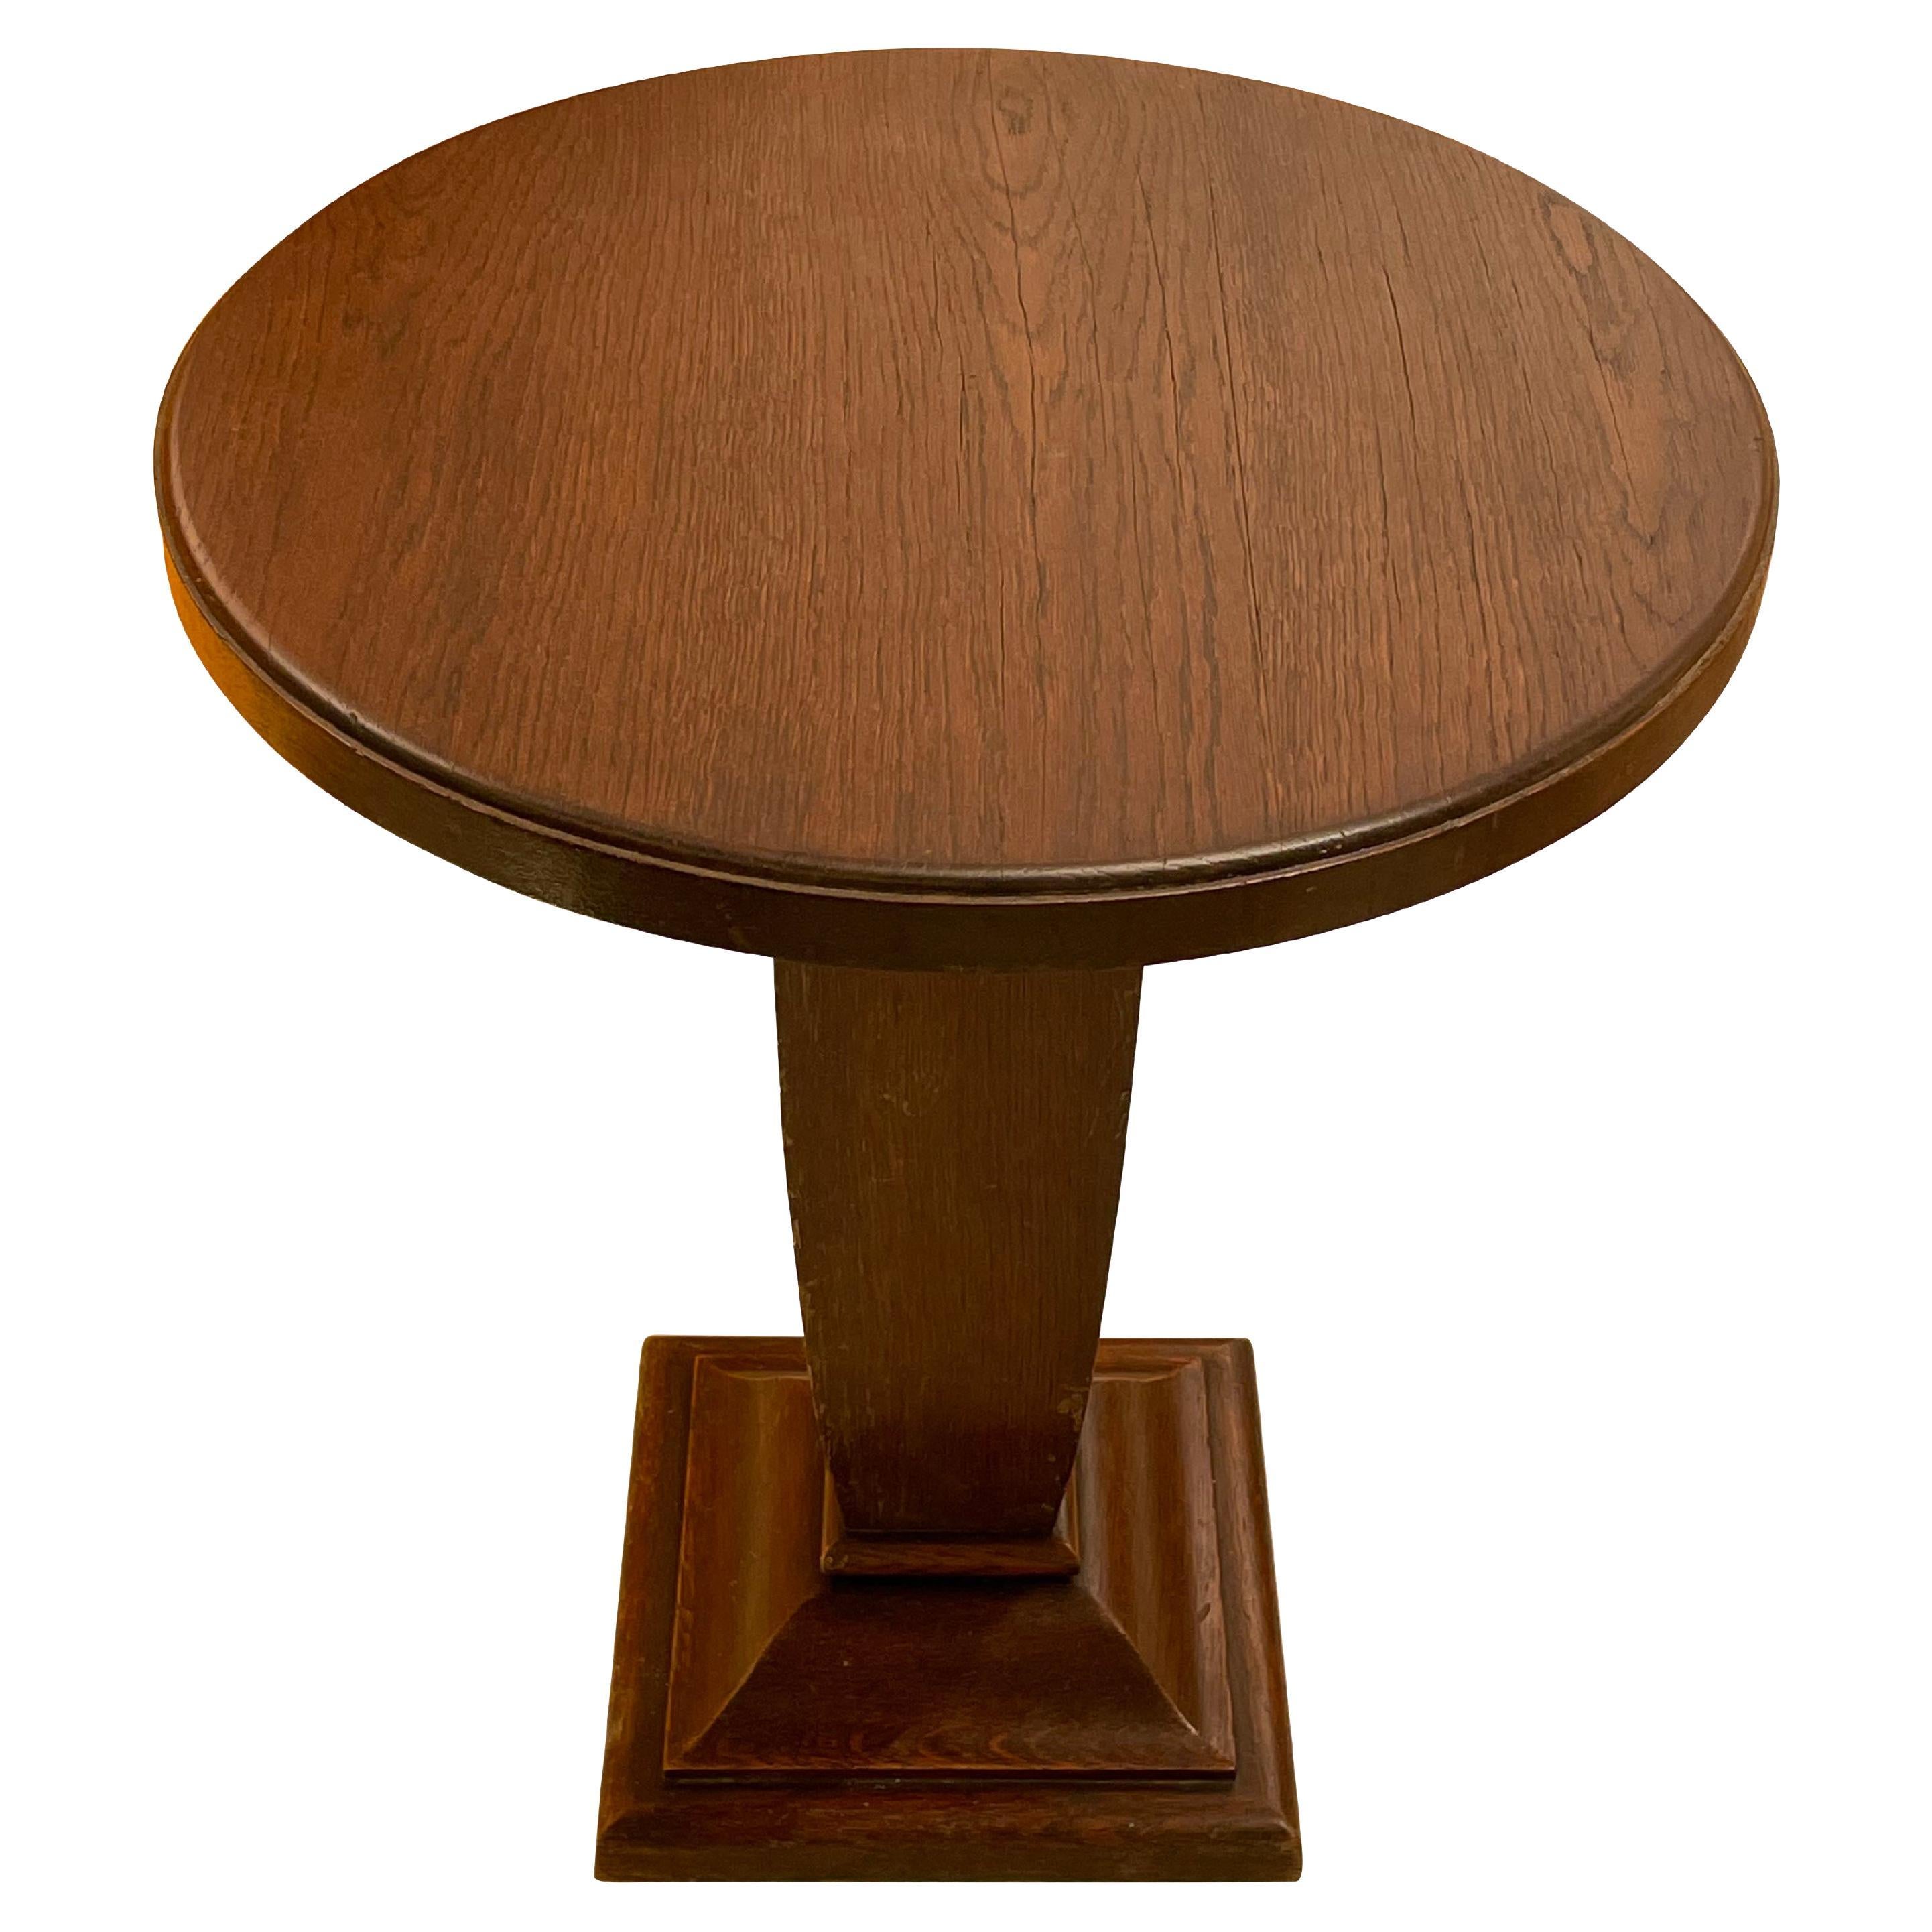 Mid century French round top side table with elongated sphere shaped column
Supporting the round top.
Oak wood.
Stepped square column base.
Arriving April.